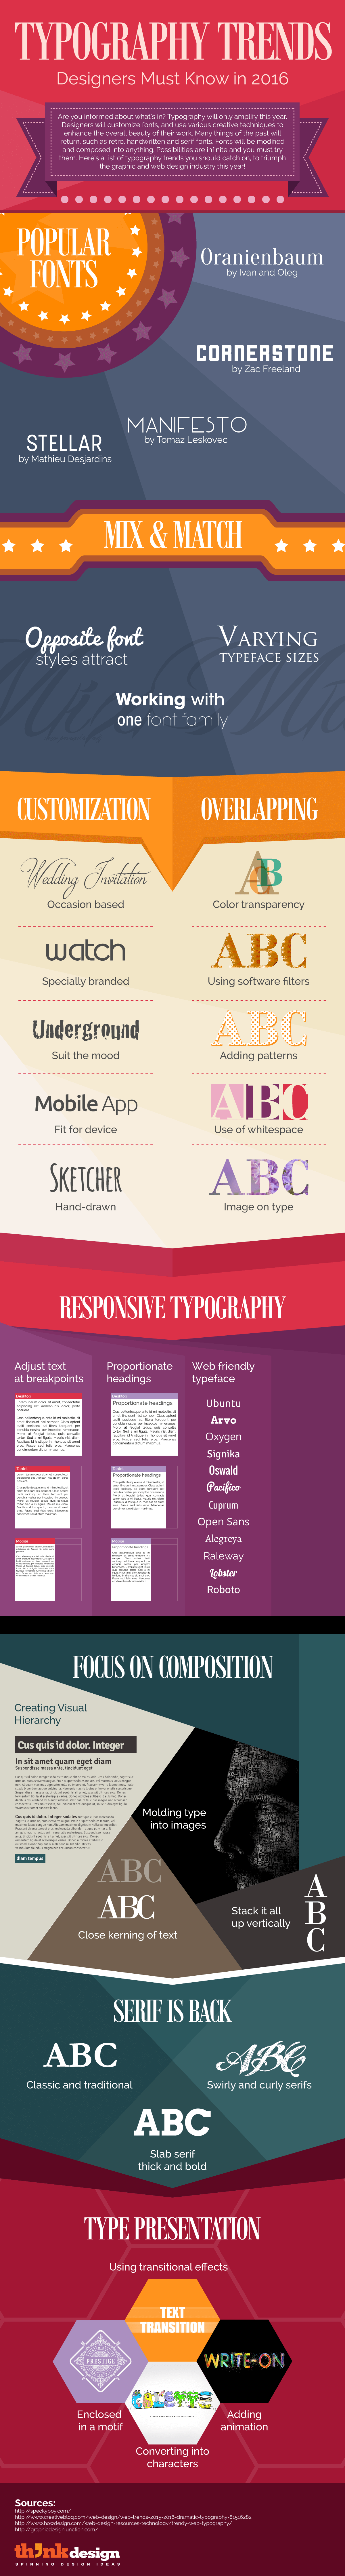 typography-trends-infographic.png